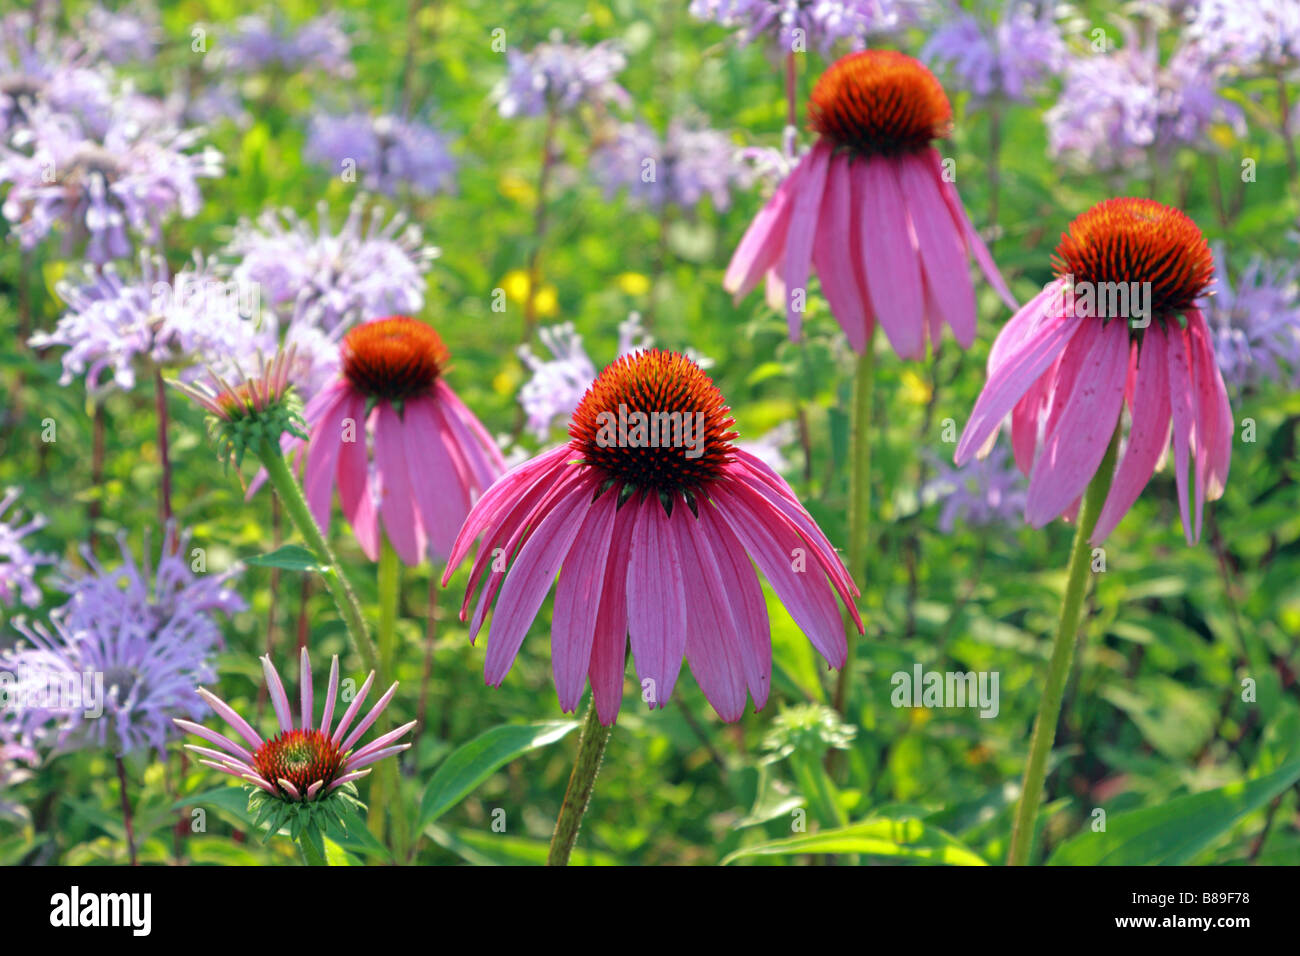 Echinacea flowers in wildflower meadow in Don Valley Brickworks conservation area Toronto Ontario Canada Stock Photo